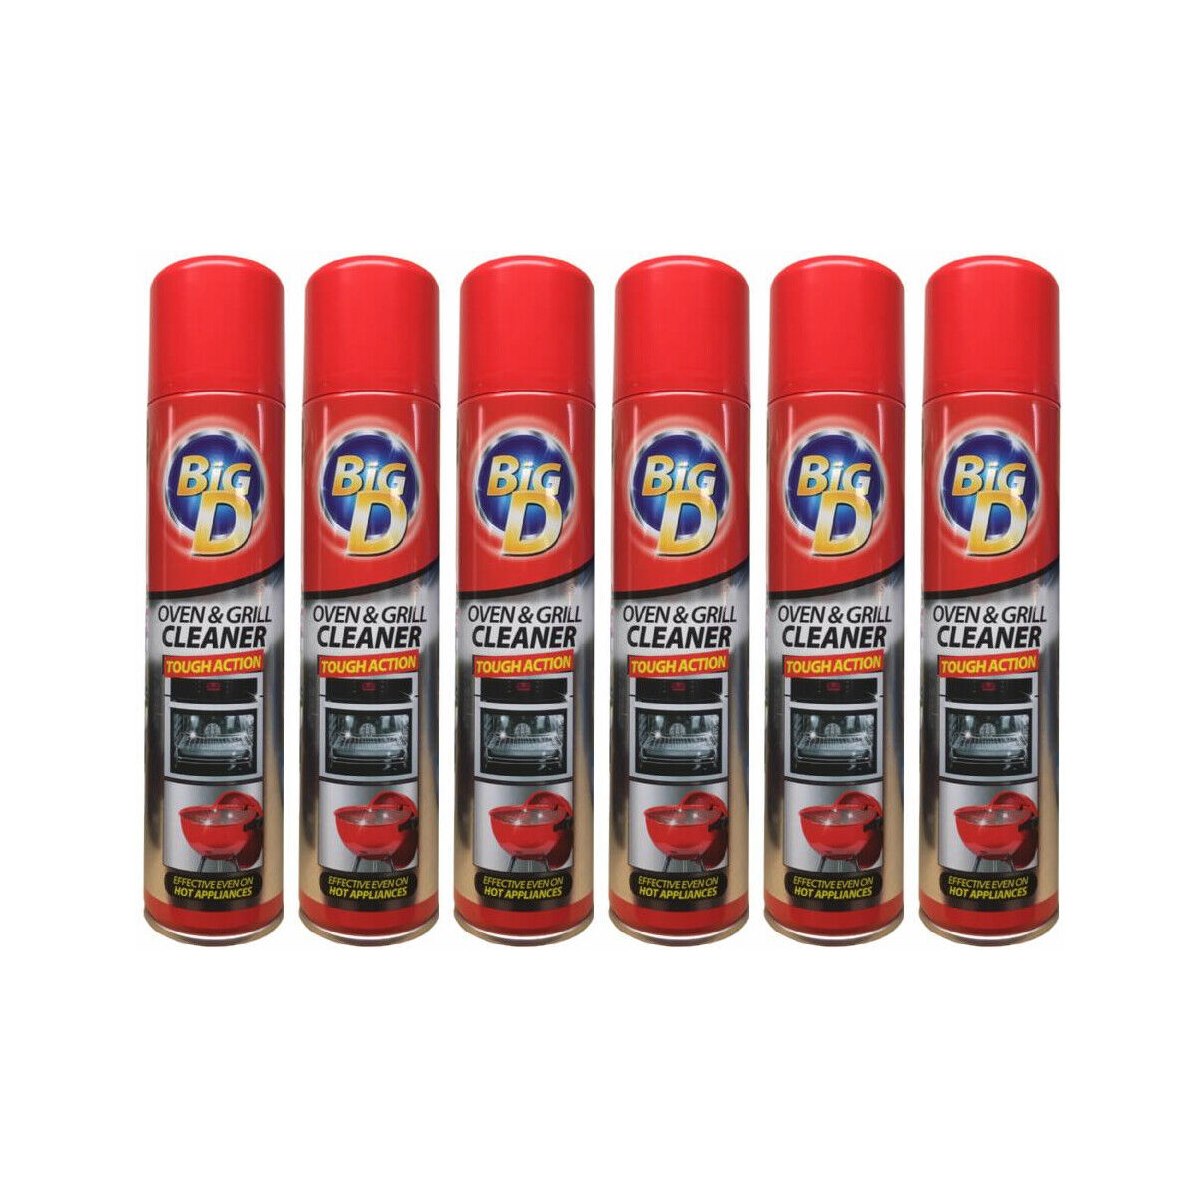 Case of 6 x Big D Oven and Grill Cleaner Spray 300ml